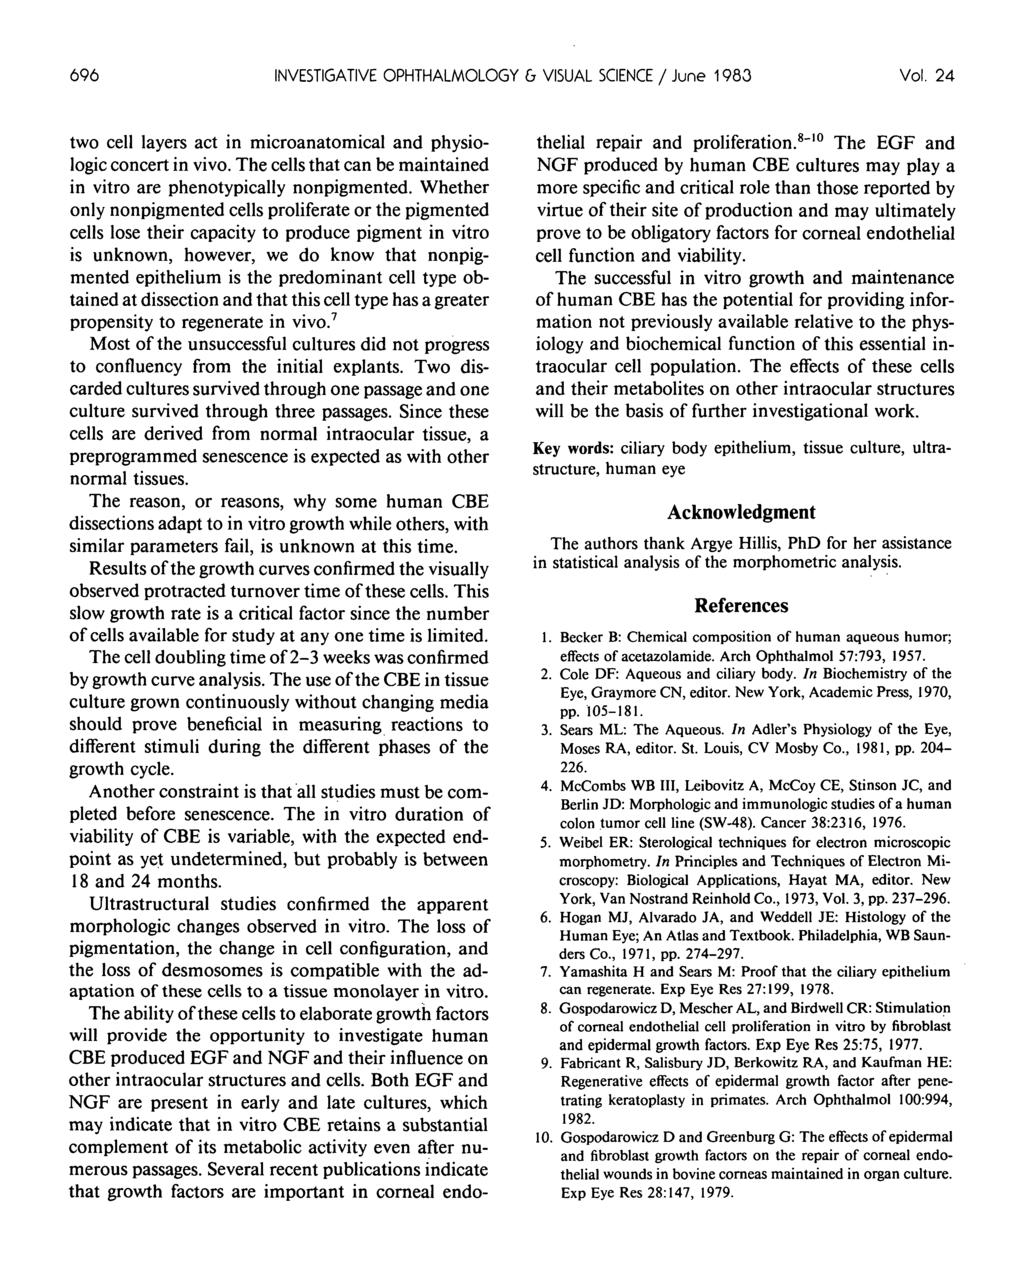 696 INVESTIGATIVE OPHTHALMOLOGY 6 VISUAL SCIENCE / June 1983 Vol. 24 two cell layers act in microanatomical and physiologic concert in vivo.